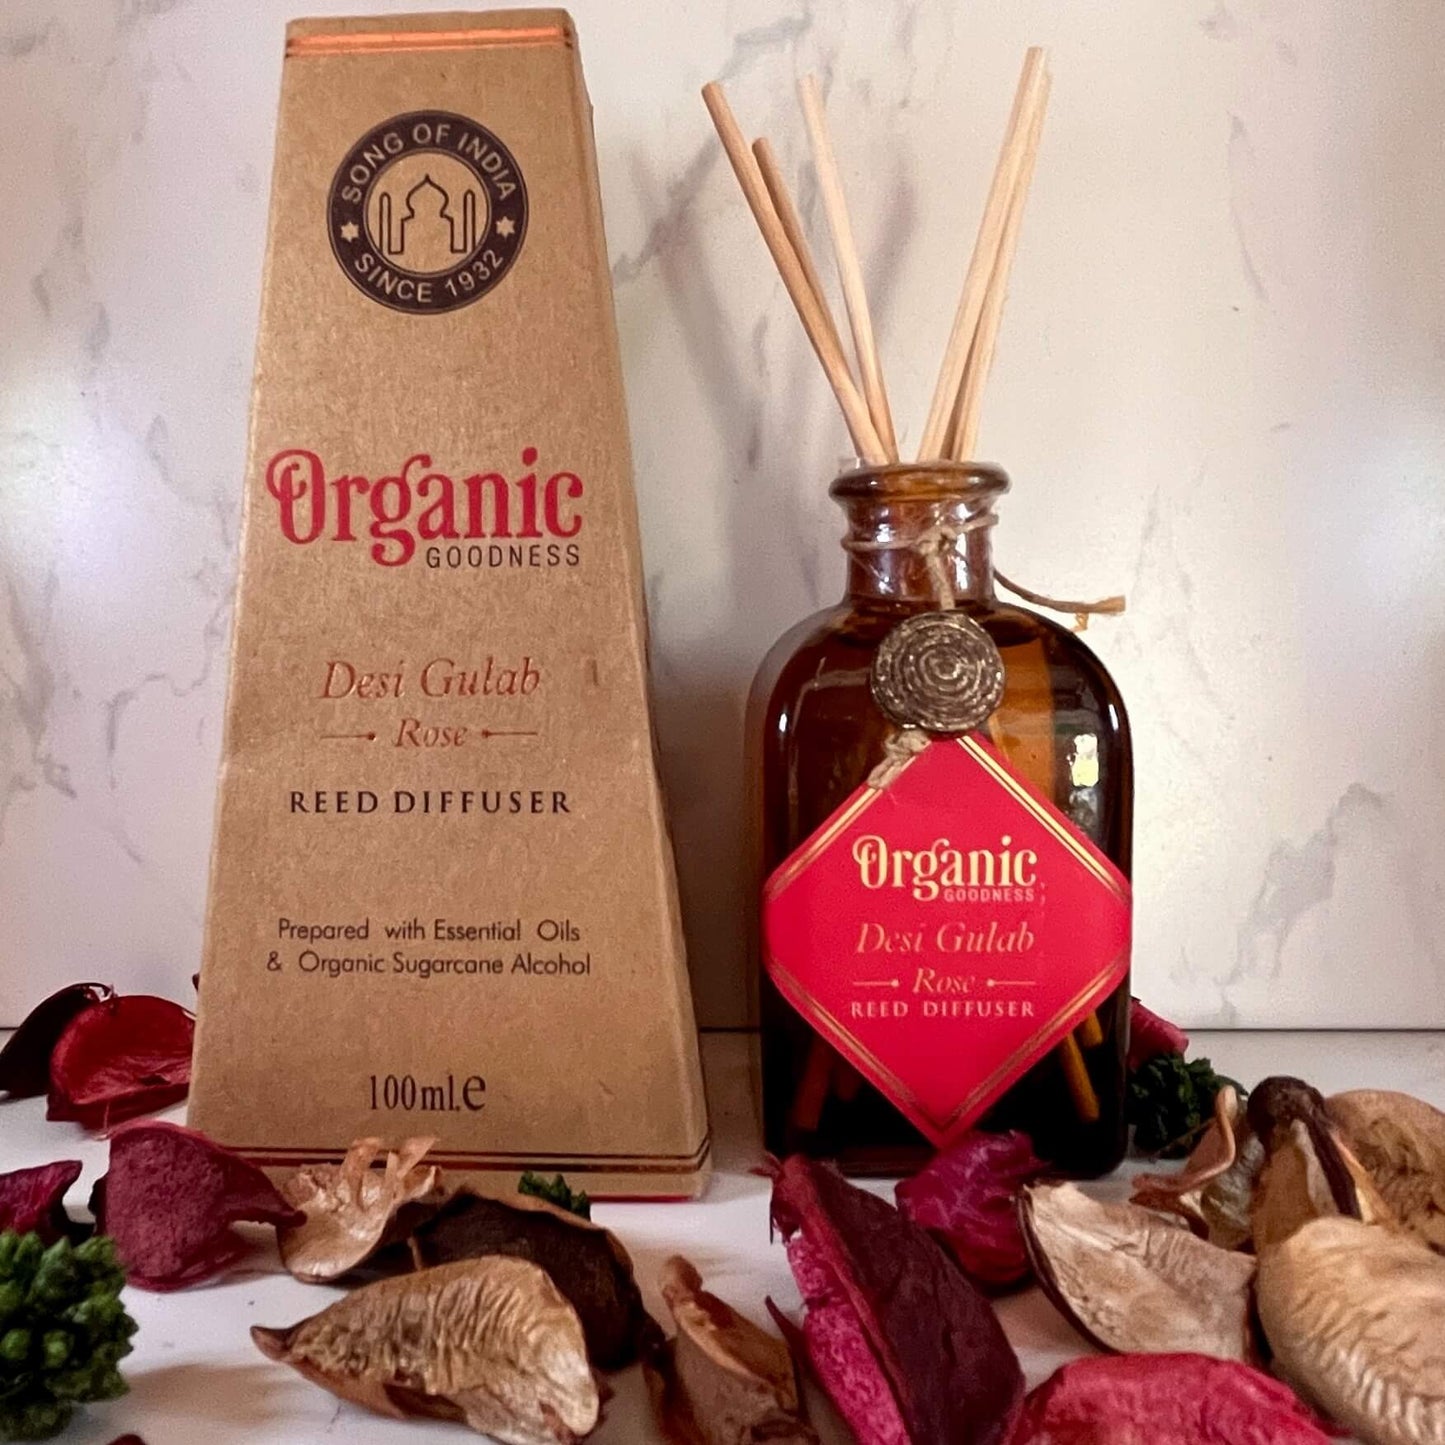 organic goodness gift set gift pack rose reed diffuser rose incense essential oil room spray rose desi gulab pack incense holder natural hand made special buy sale